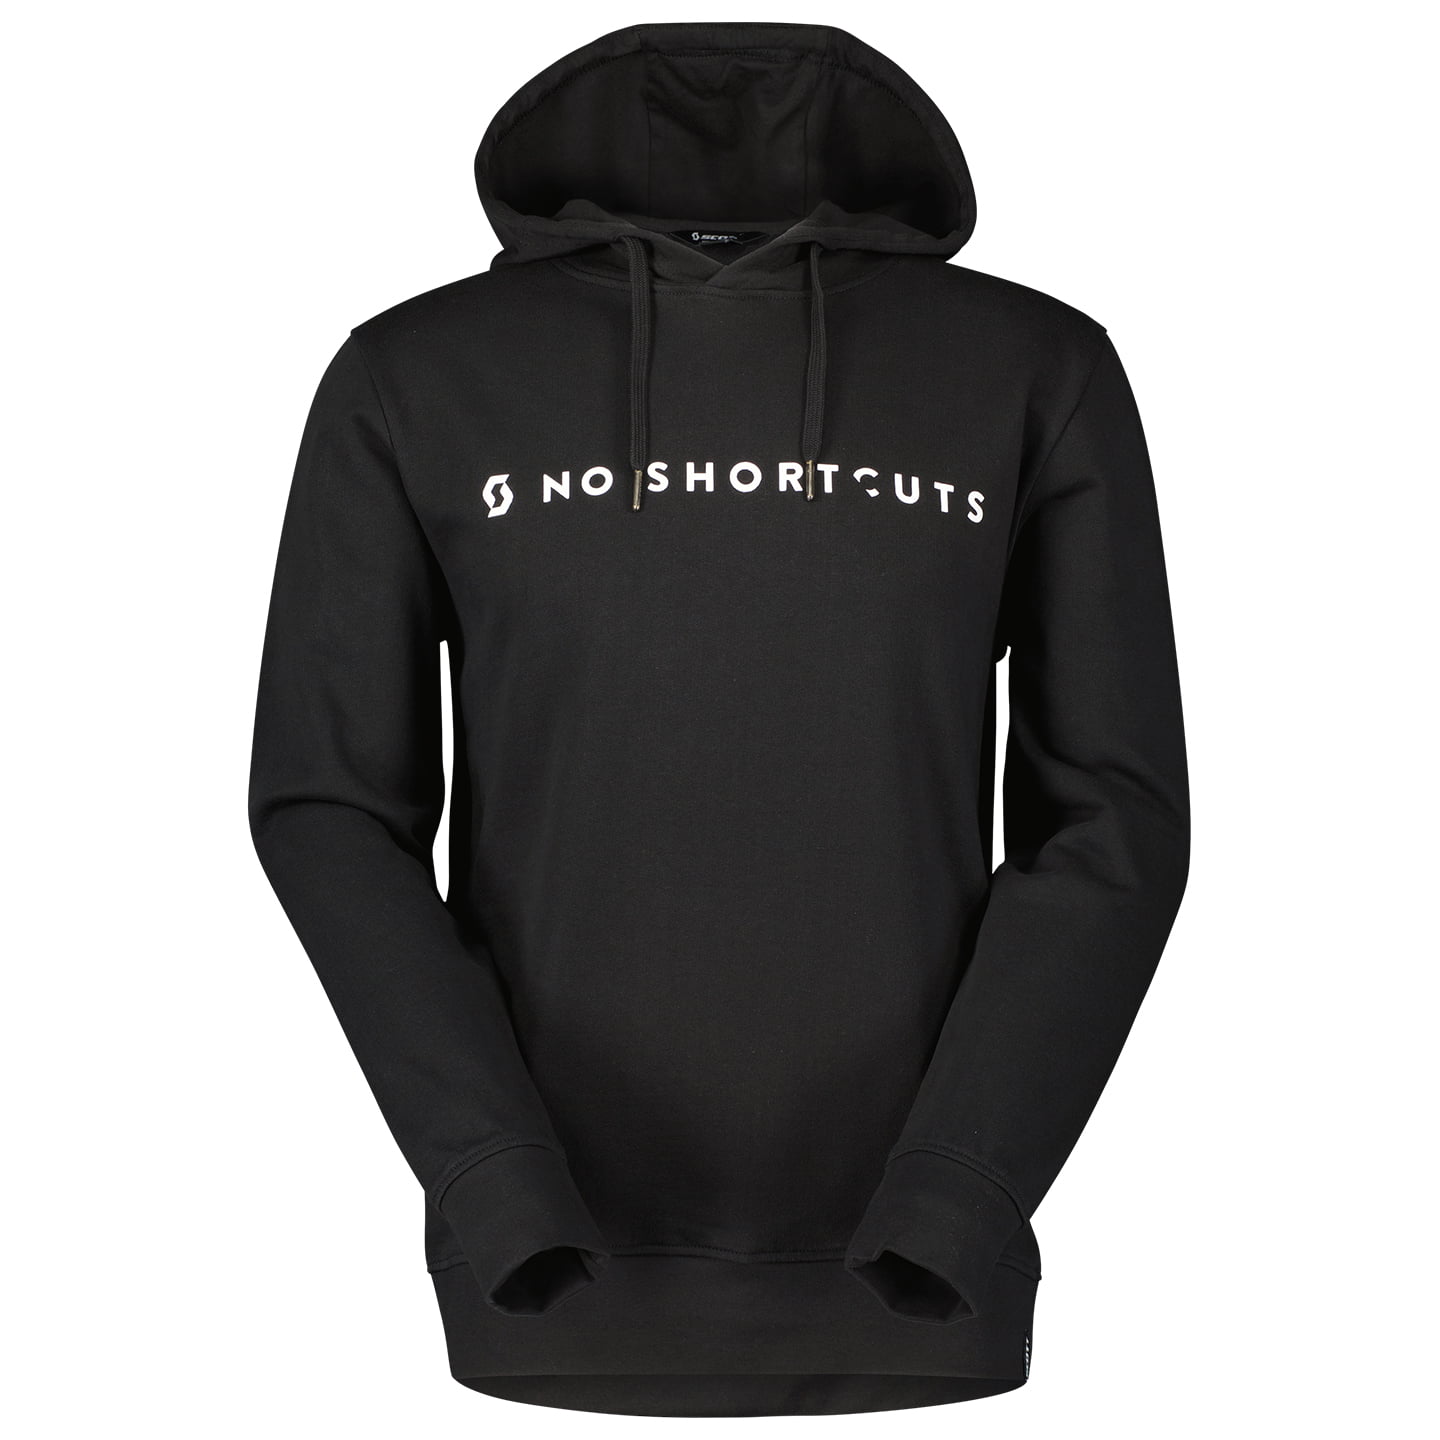 No Shortcuts Hoody, for men, size S, MTB Jersey, MTB clothing